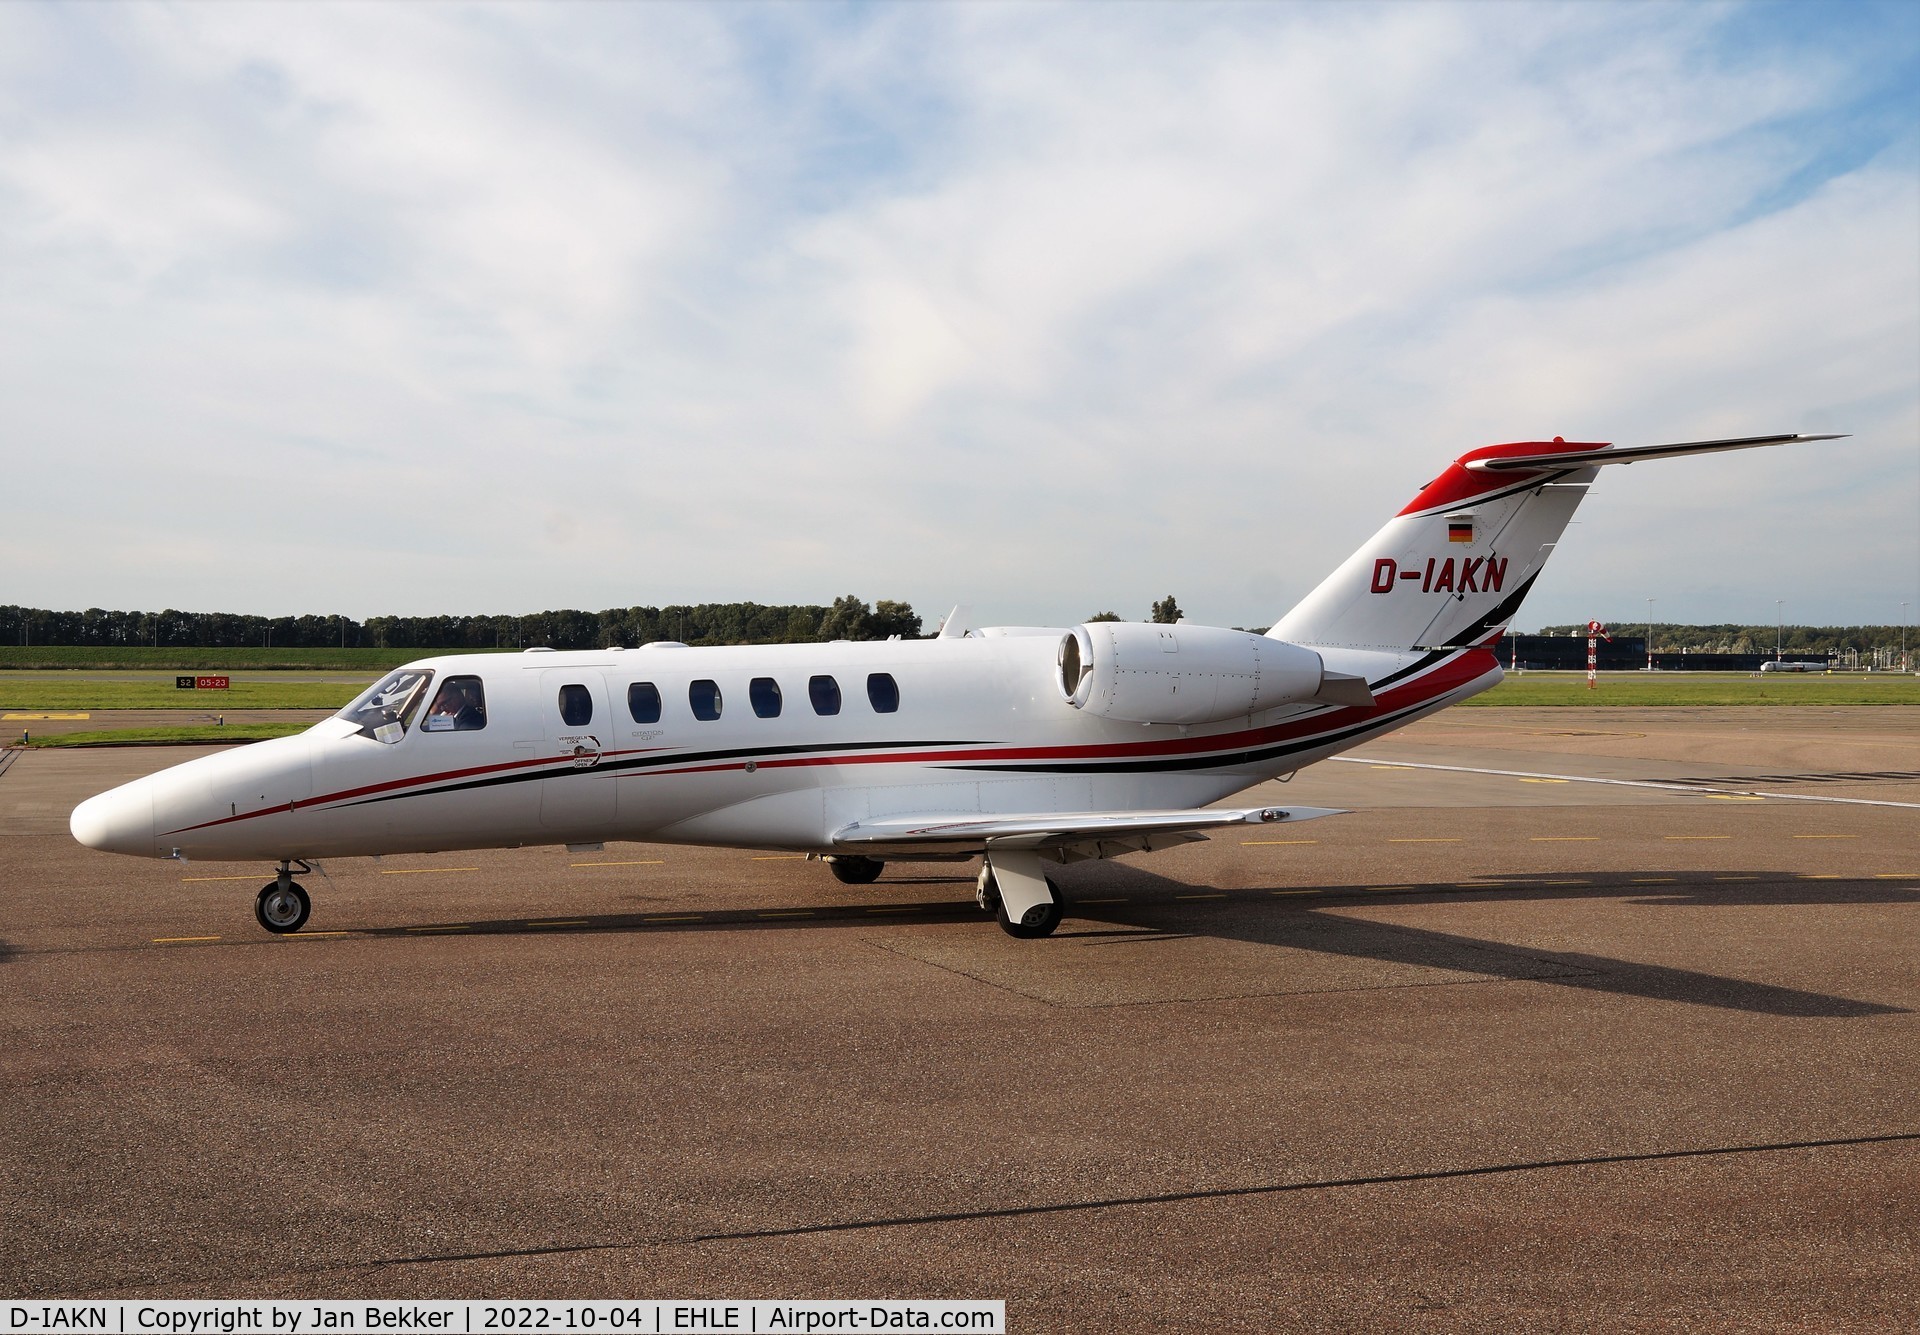 D-IAKN, 2007 Cessna 525A CitationJet CJ2+ C/N 525A-0367, Arrived at Lelystad Airport from Blackpool